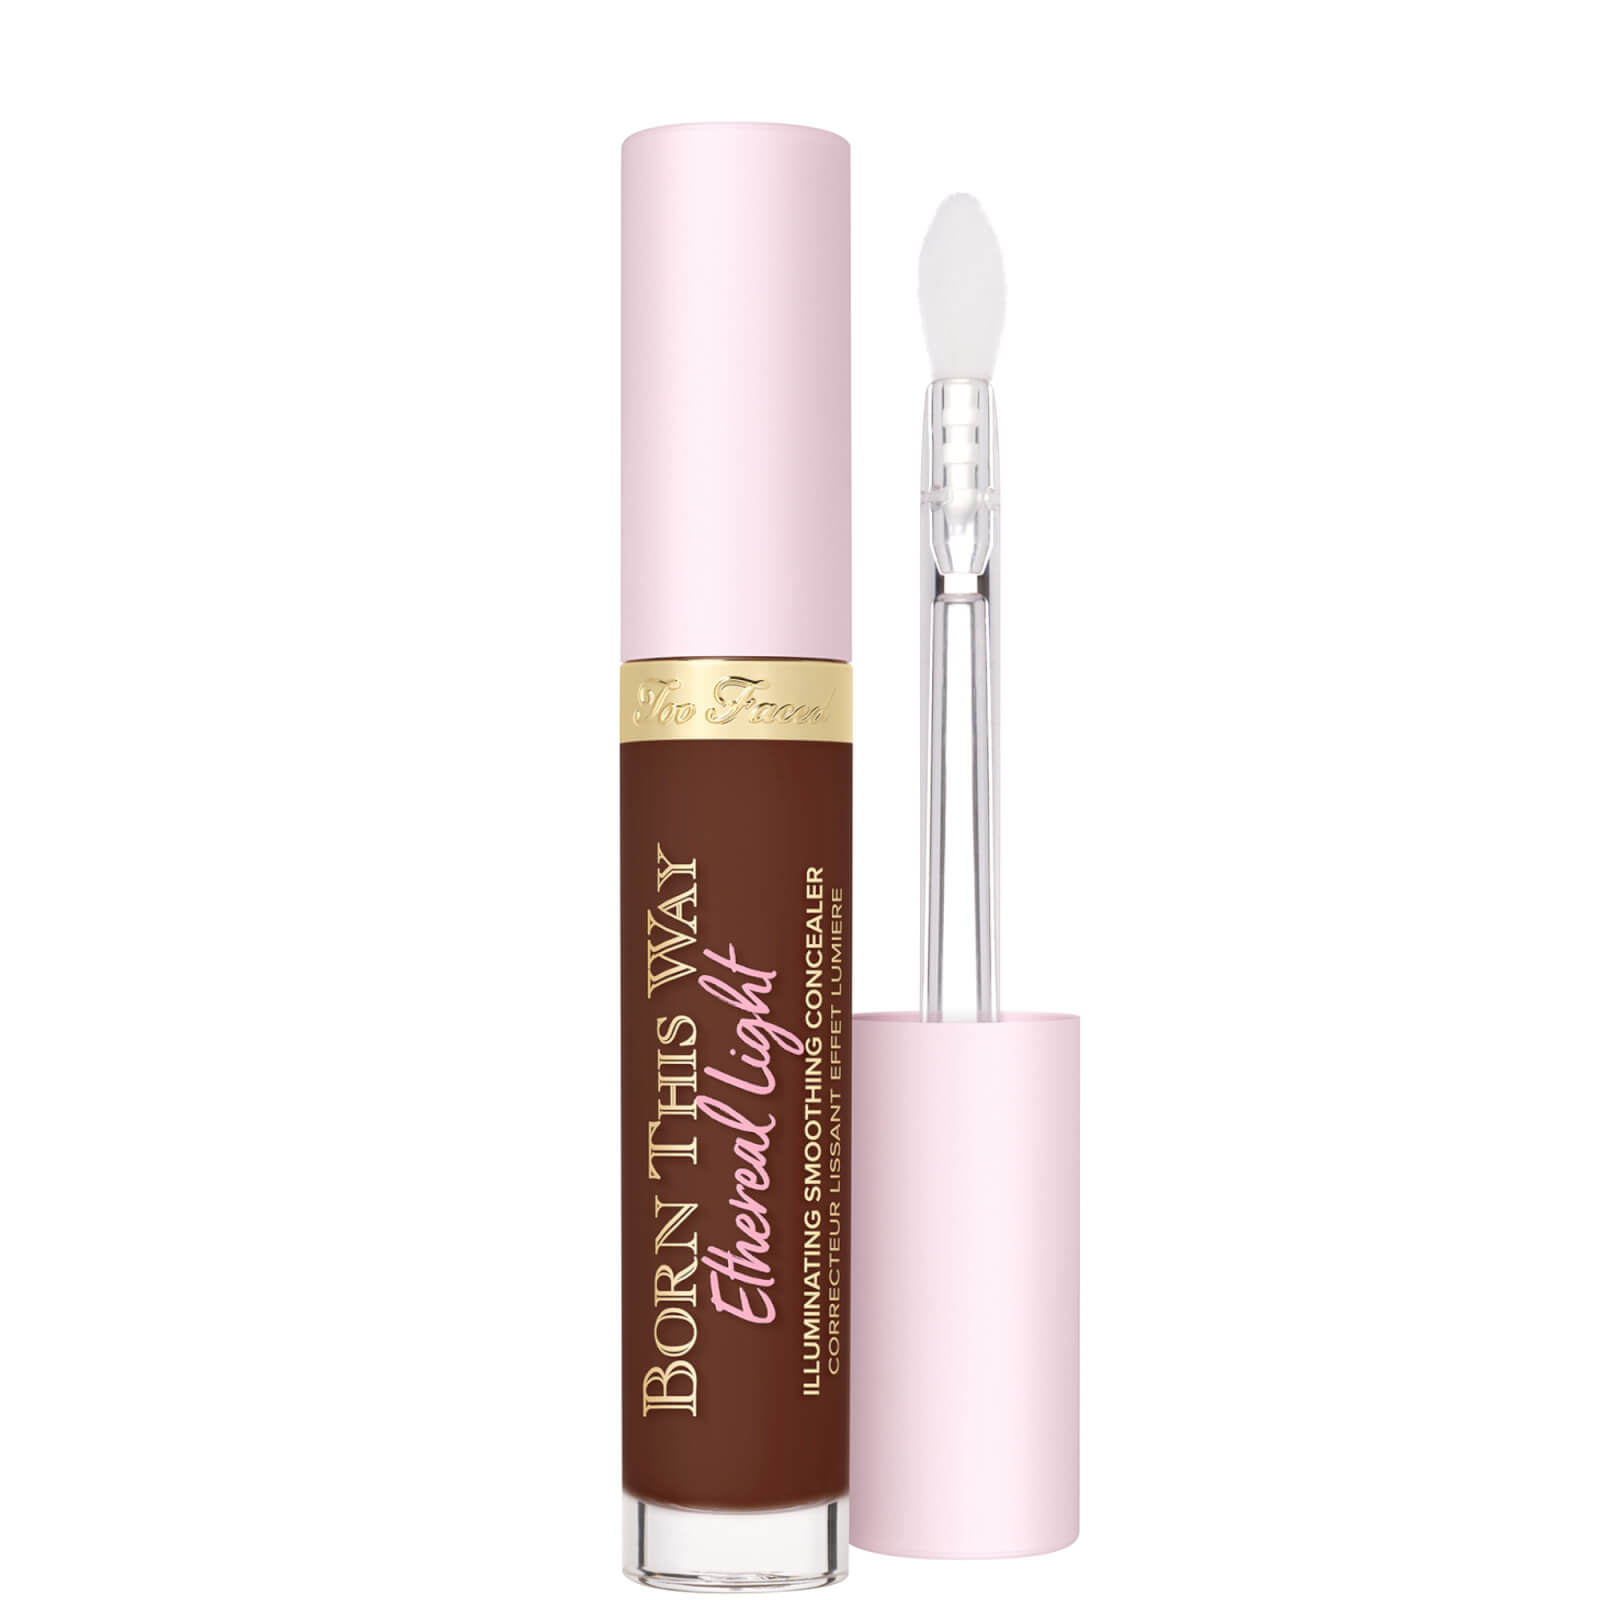 Too Faced Born This Way Ethereal Light Illuminating Smoothing Concealer 15ml (Various Shades) - Espresso